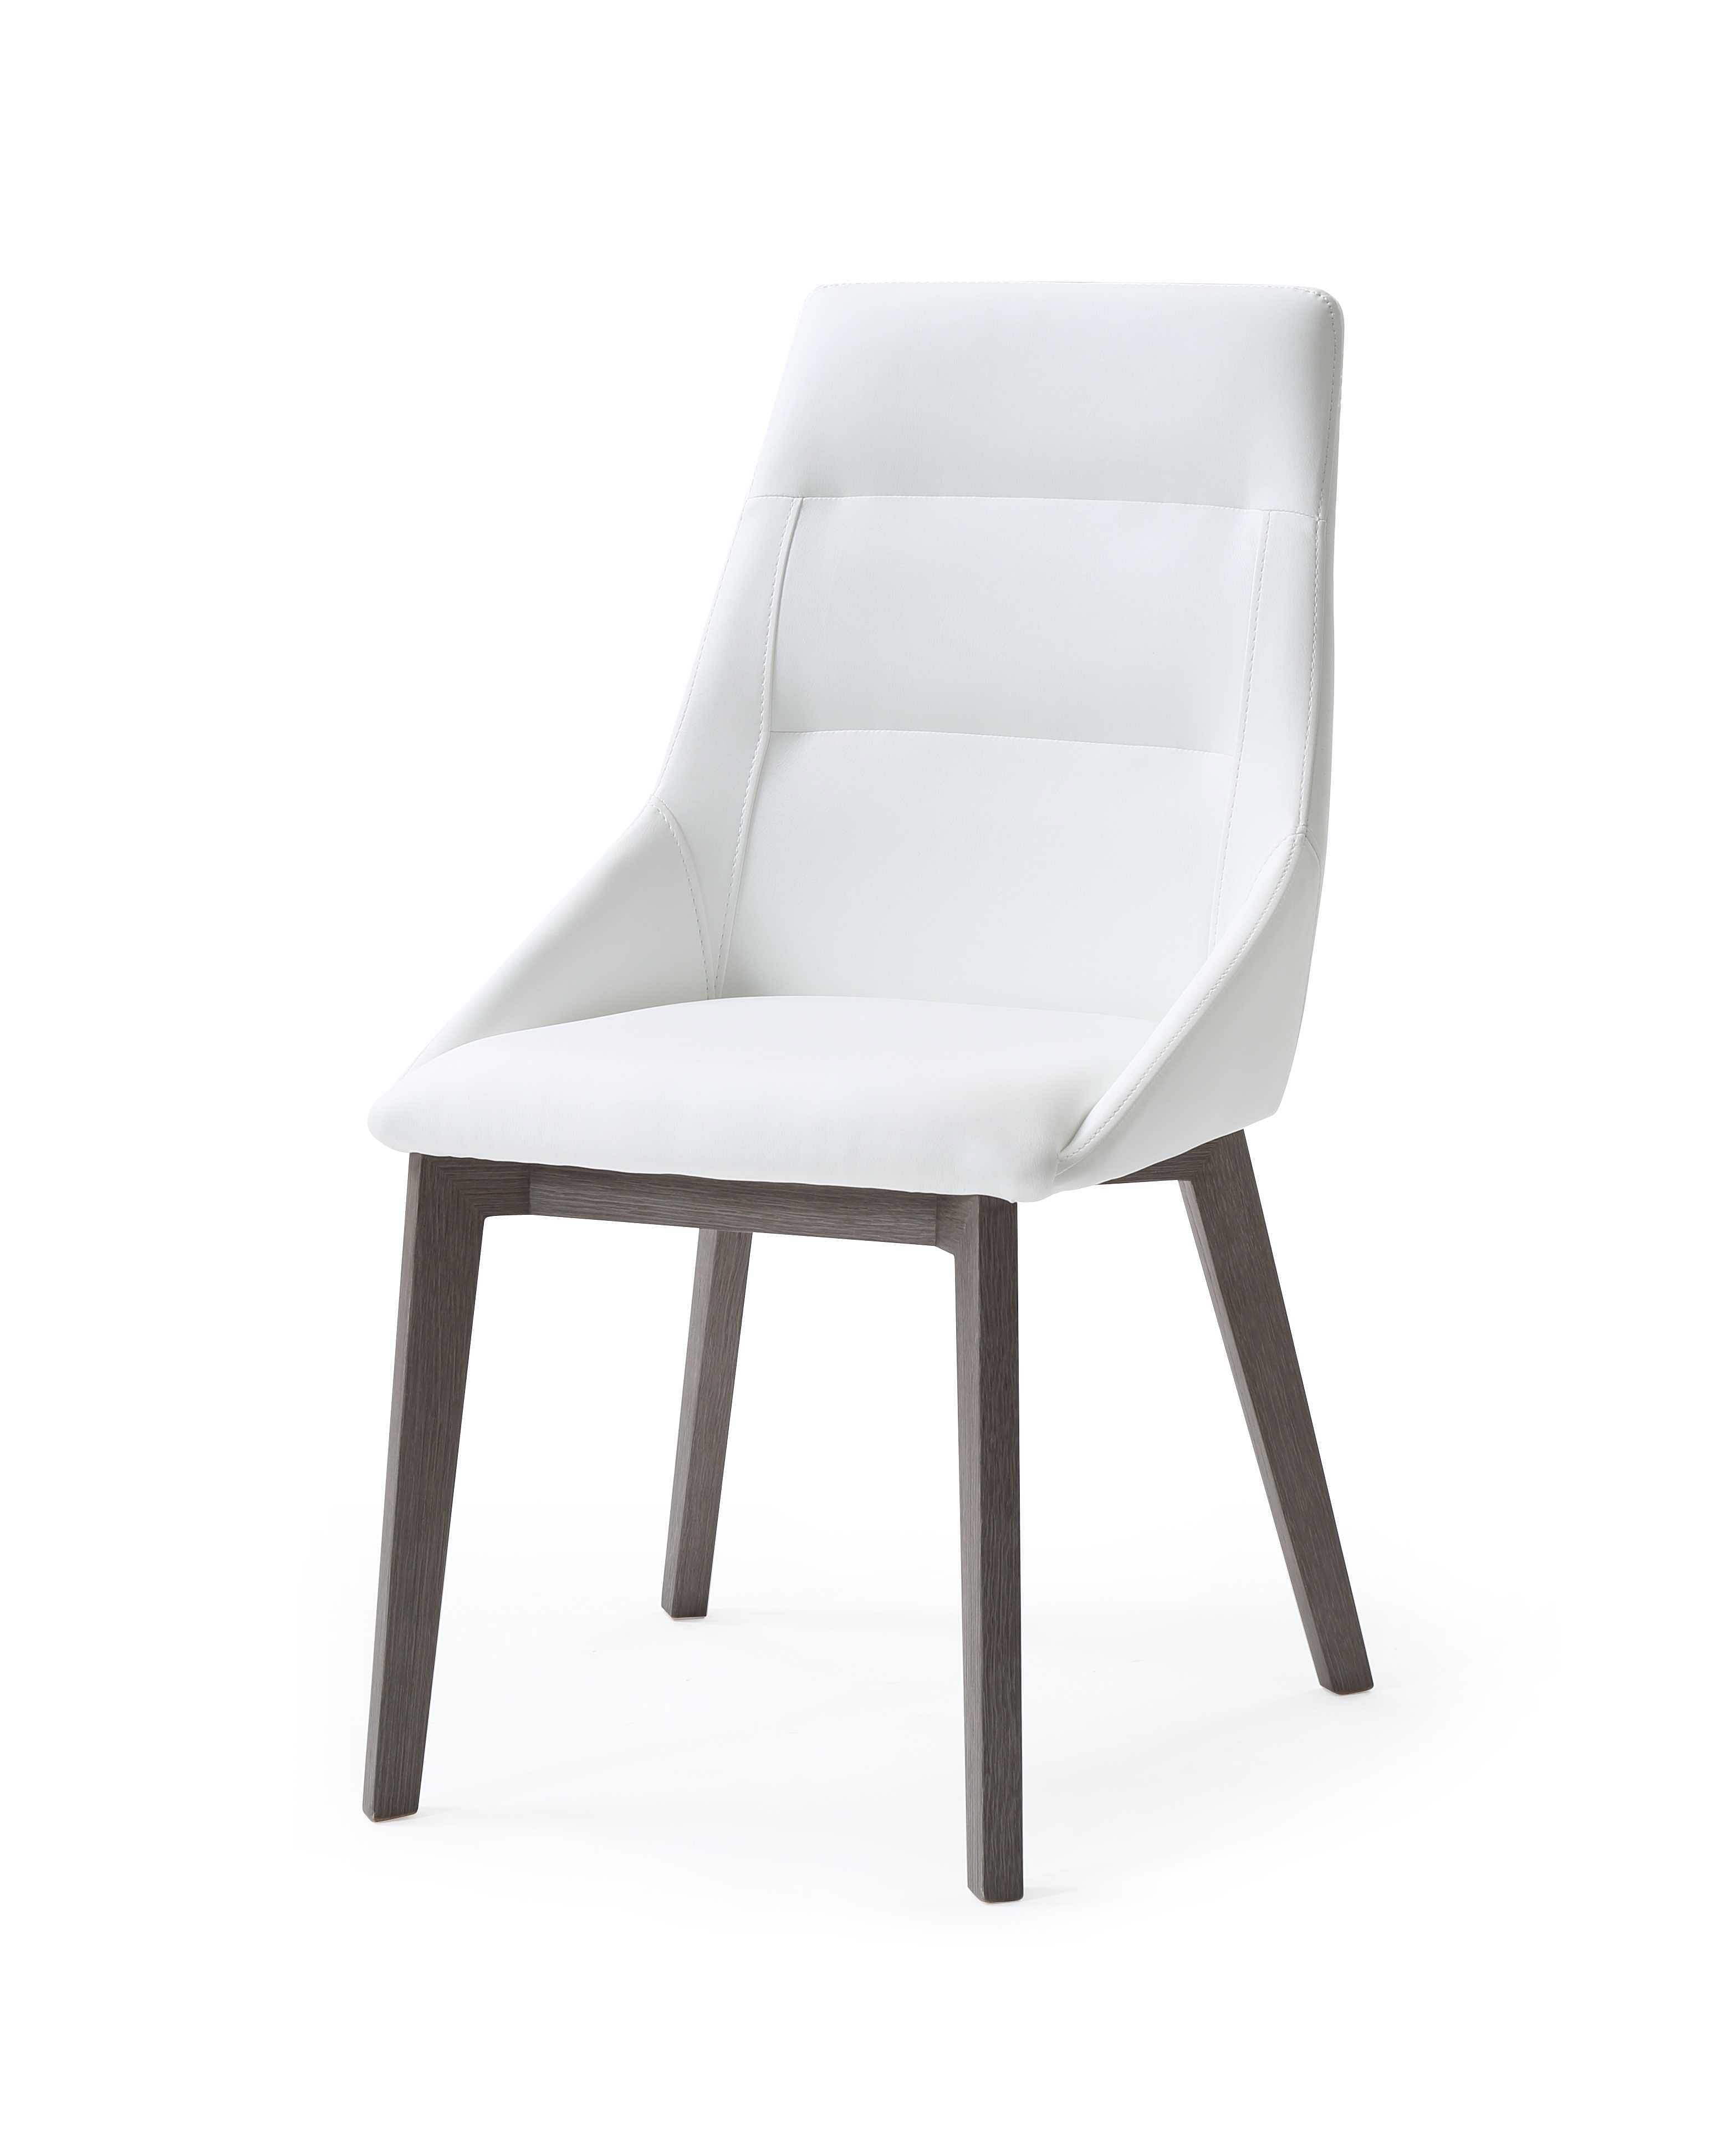 Set 2 White Faux Leather Dining Chairs